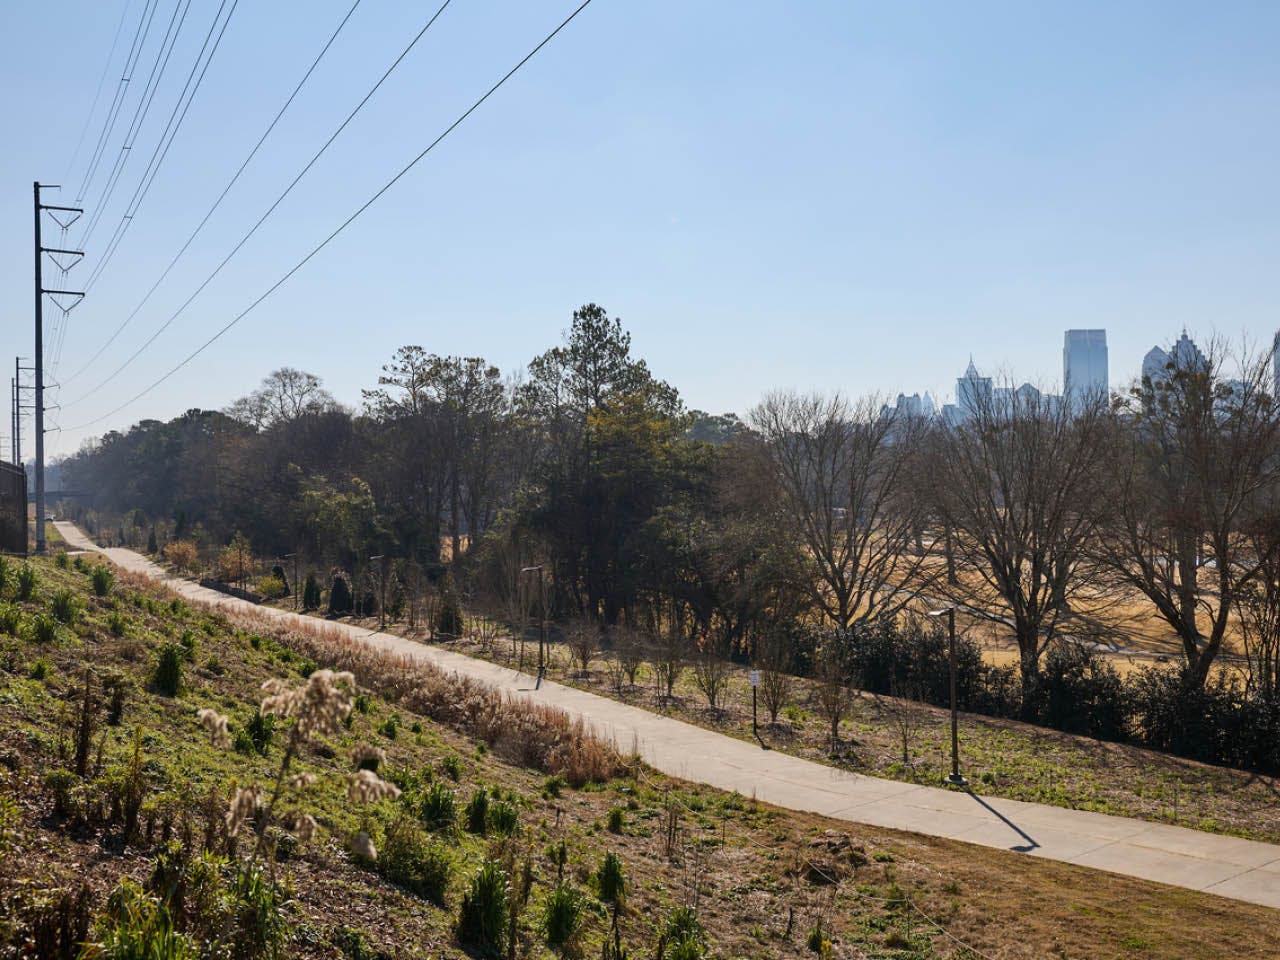 A view of the Northeast Trail across Ansley Golf Course to the Midtown skyline. (Photo Credit: Erin Sintos)